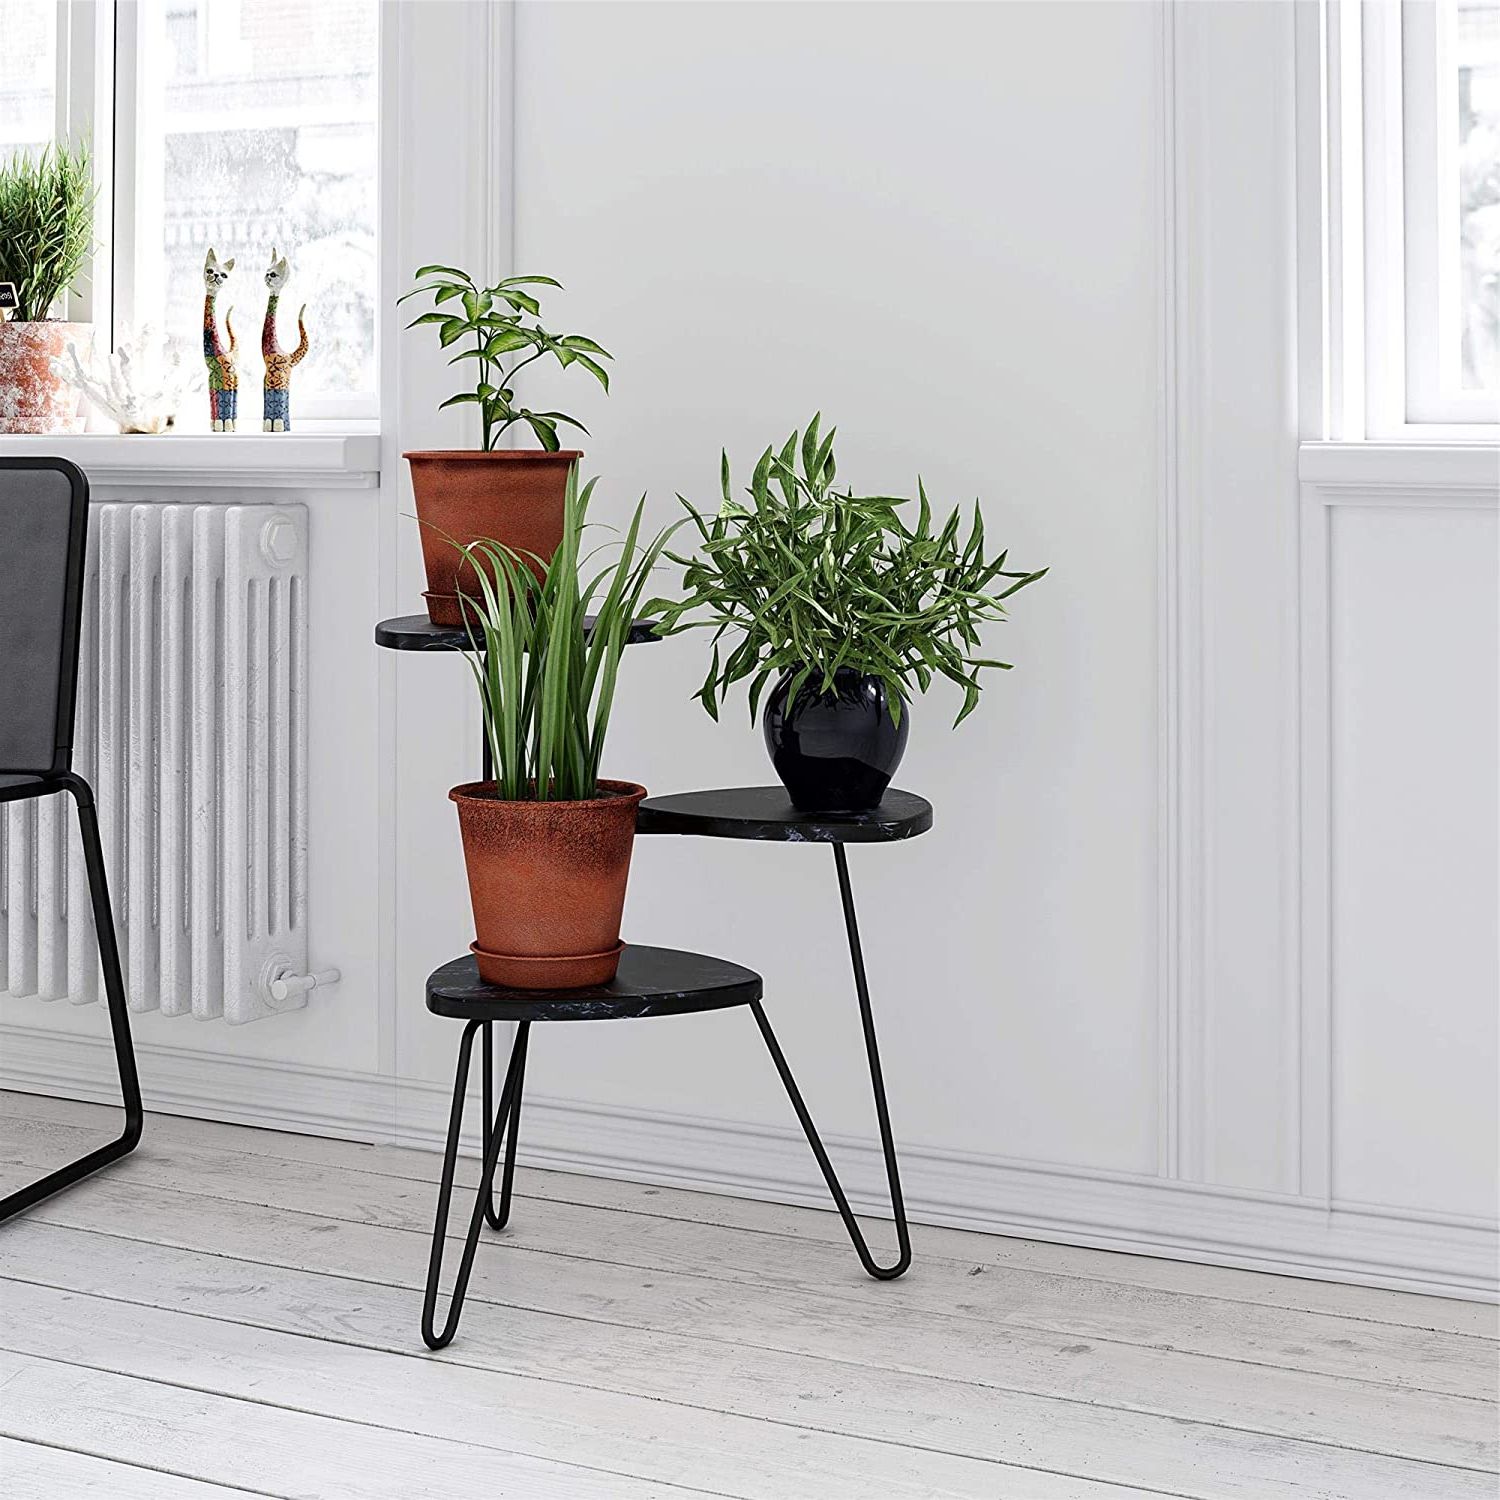 Most Recent Black Marble Plant Stands With Regard To Novogratz (uk) Athena Plant Stand – Black Marble : Amazon.co (View 3 of 10)